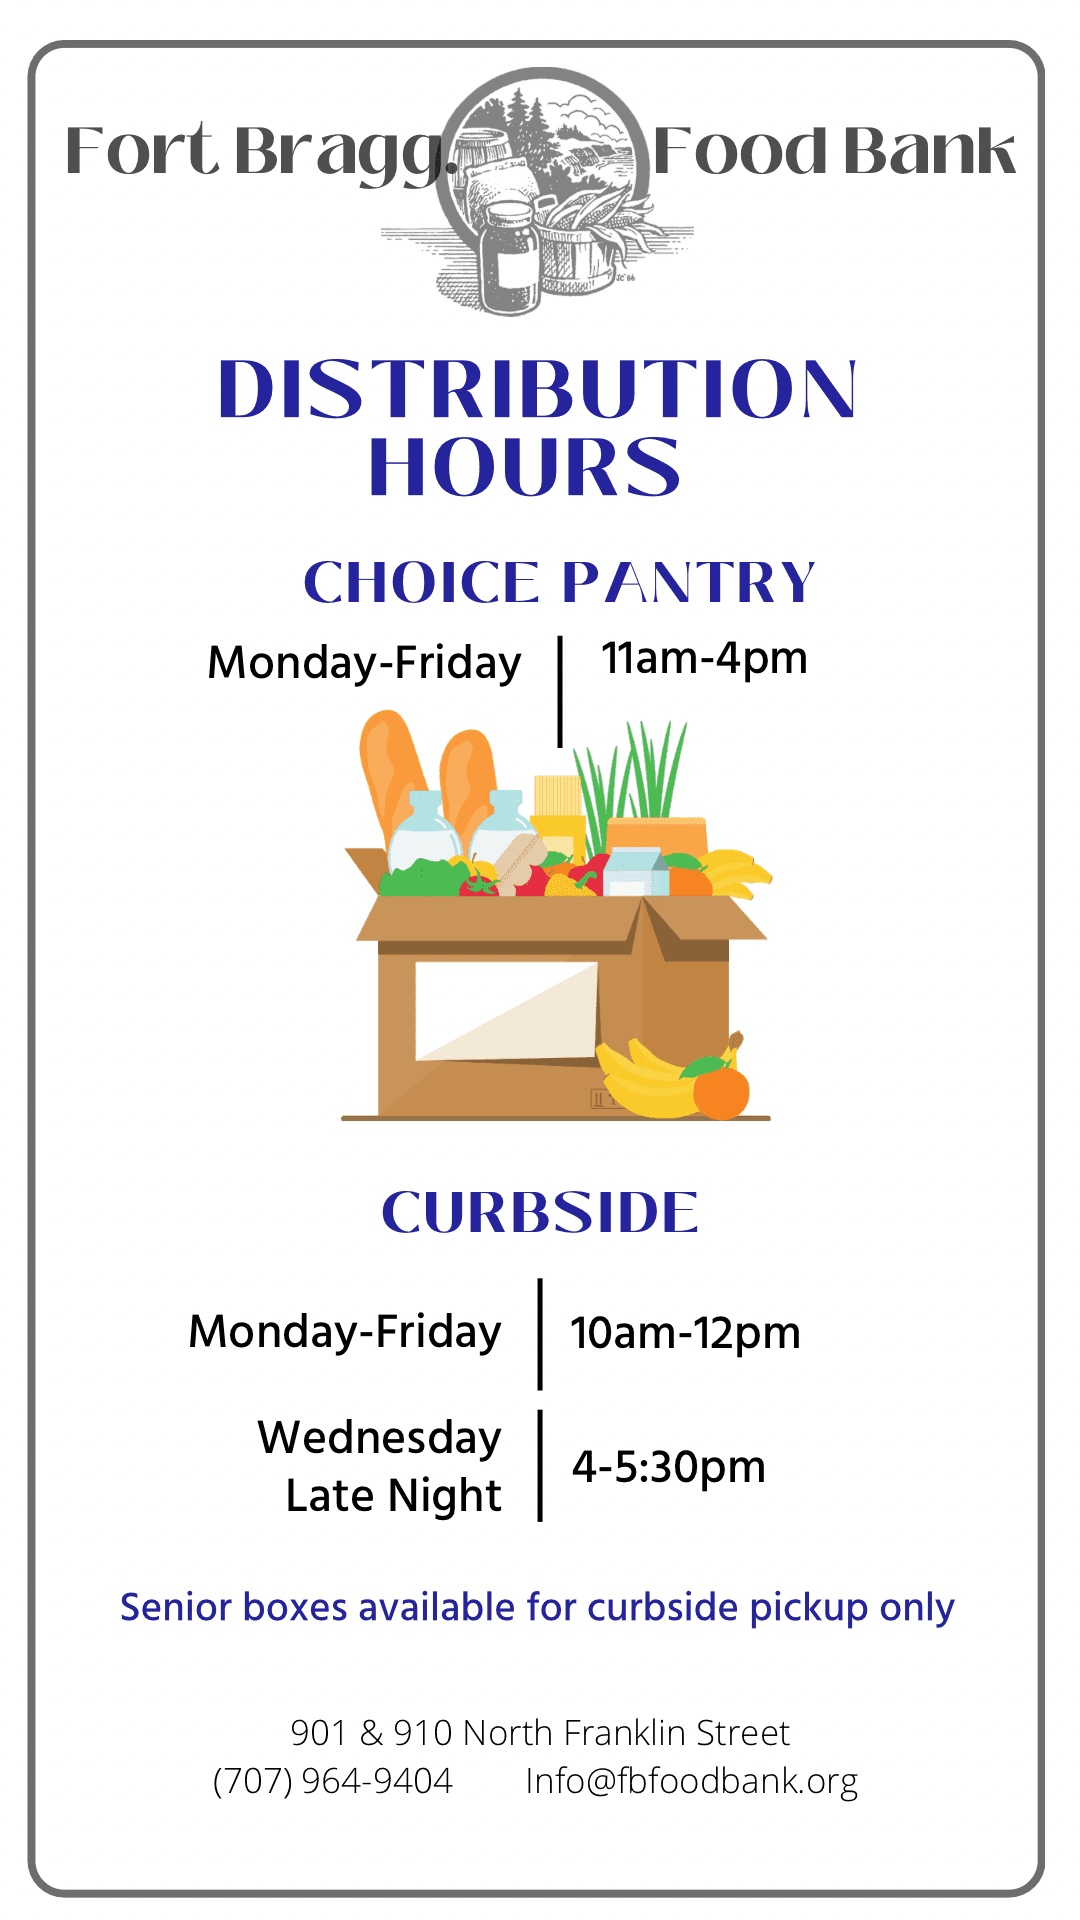 New Hours for Curbside and Choice Pantry 